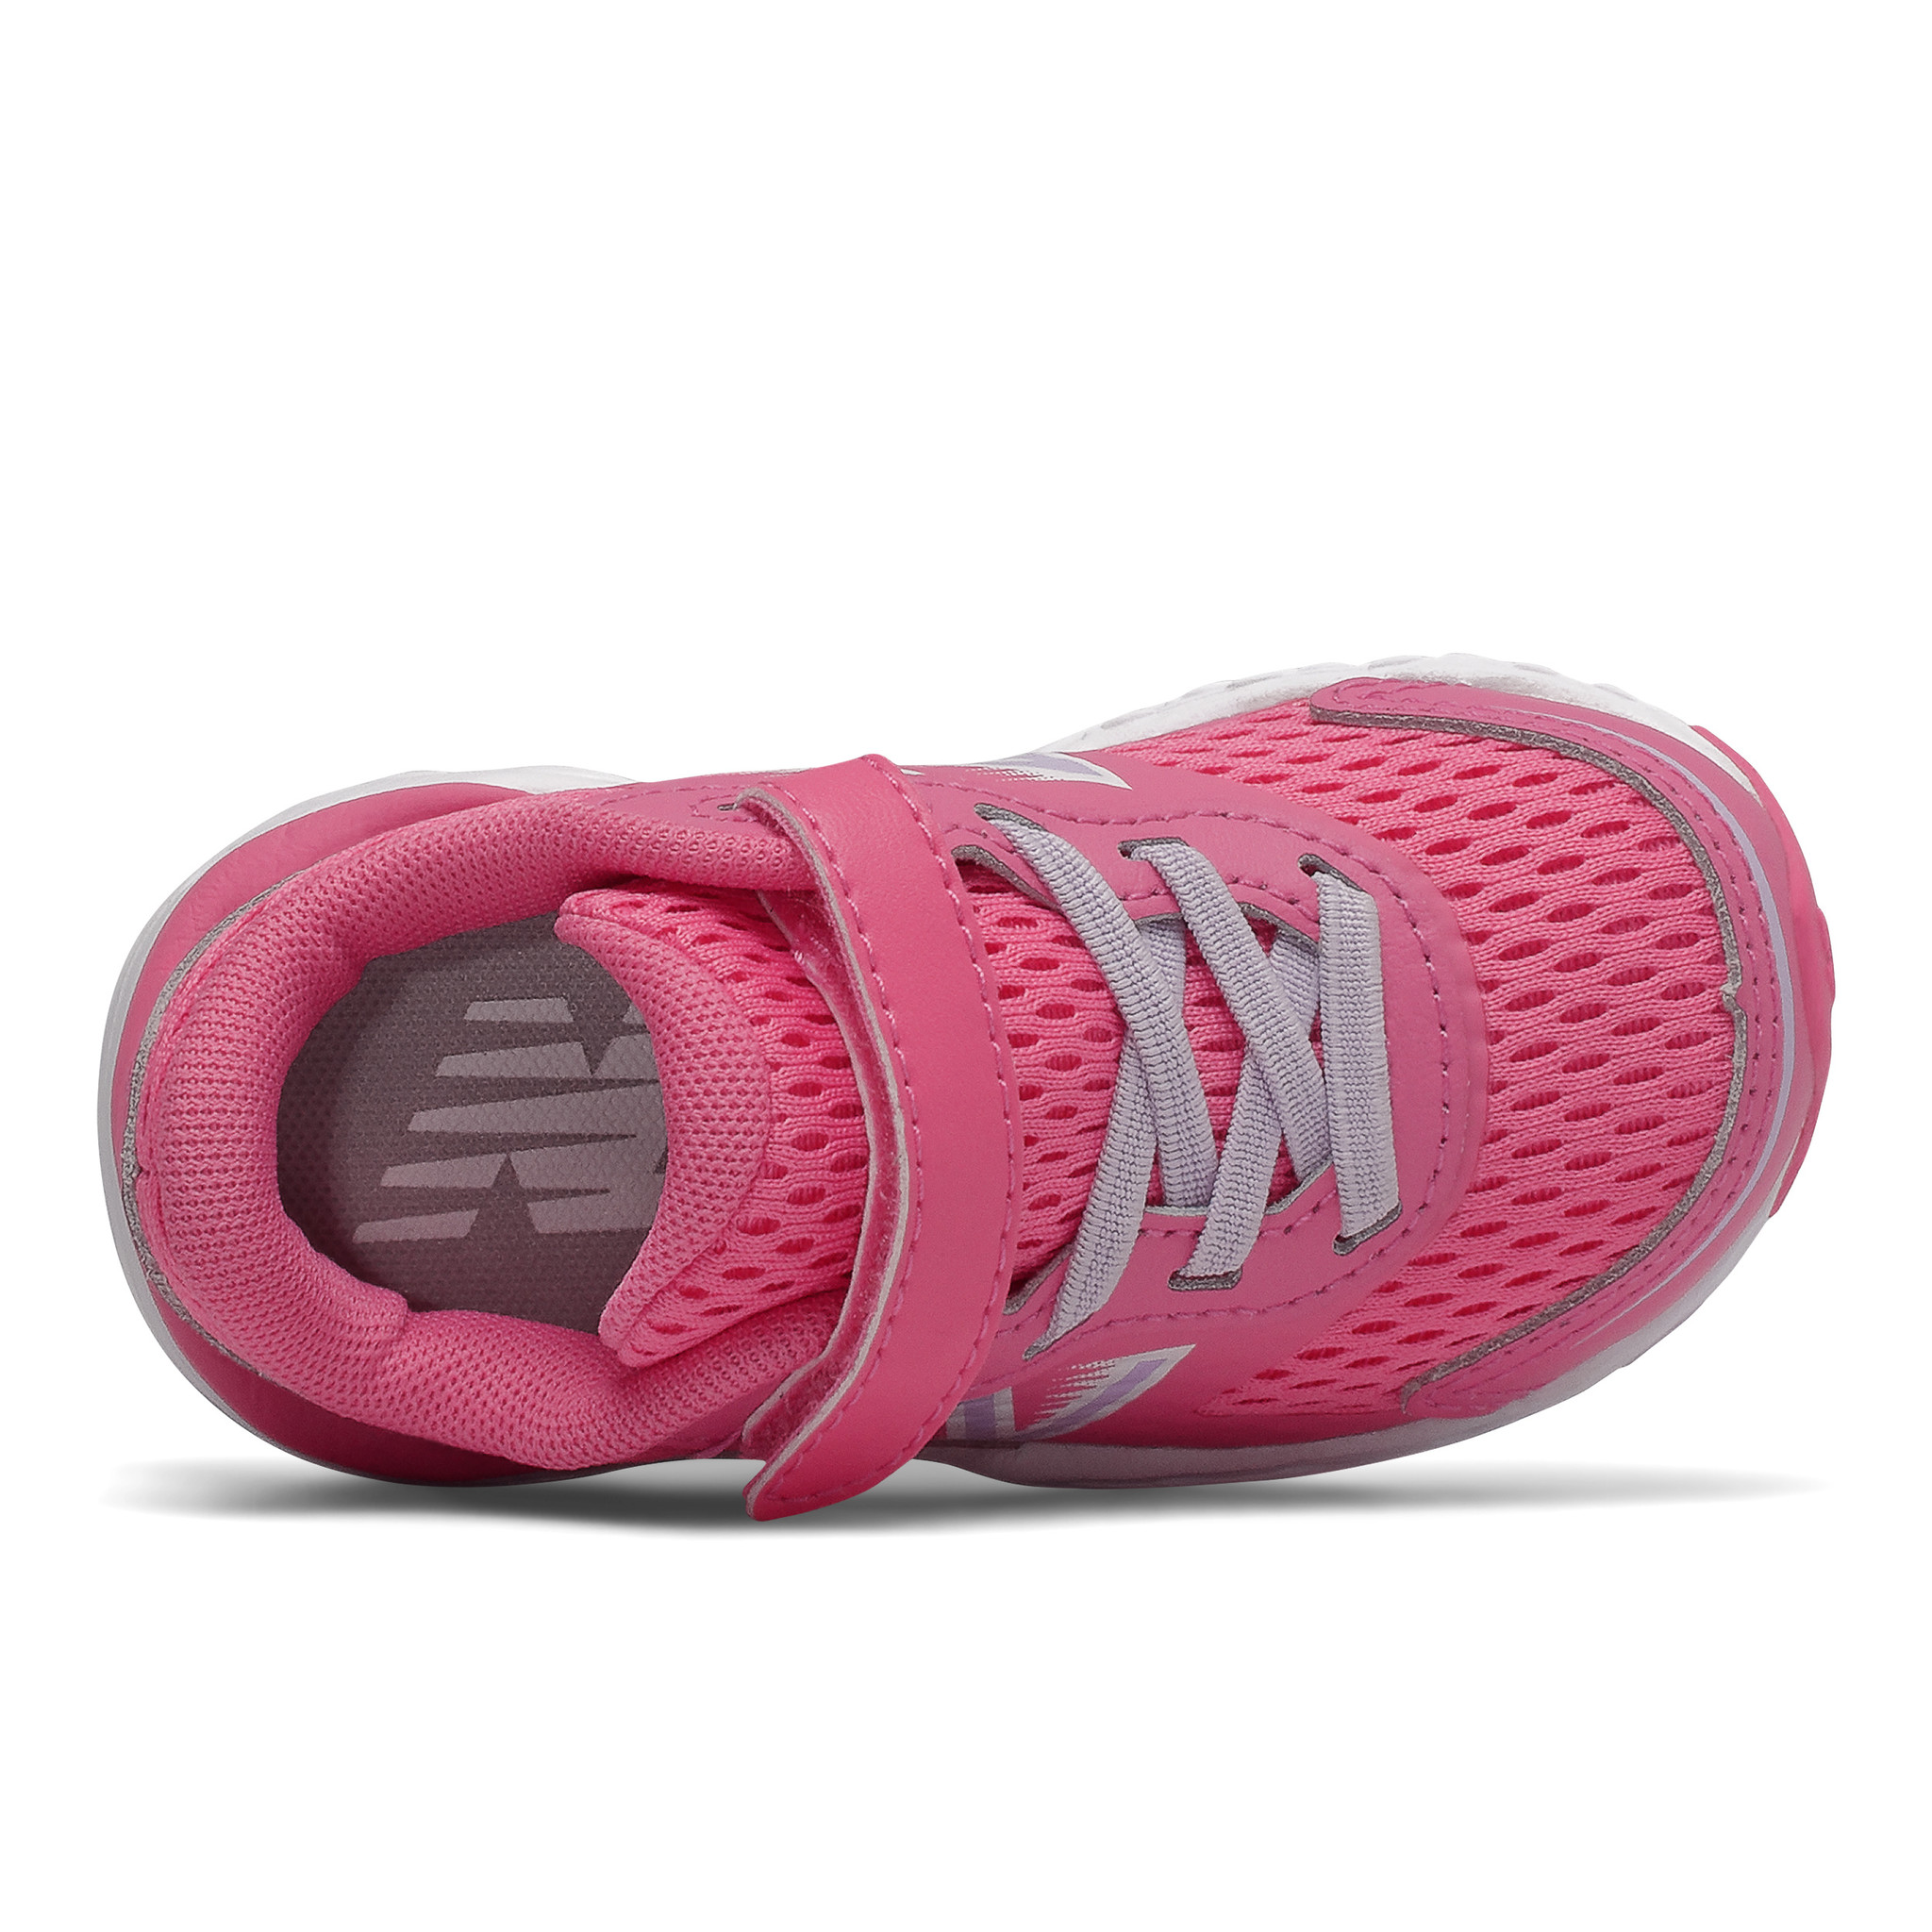 New Balance IA680v6 Sporty Pink (XW) - Kids Shoes in Canada 